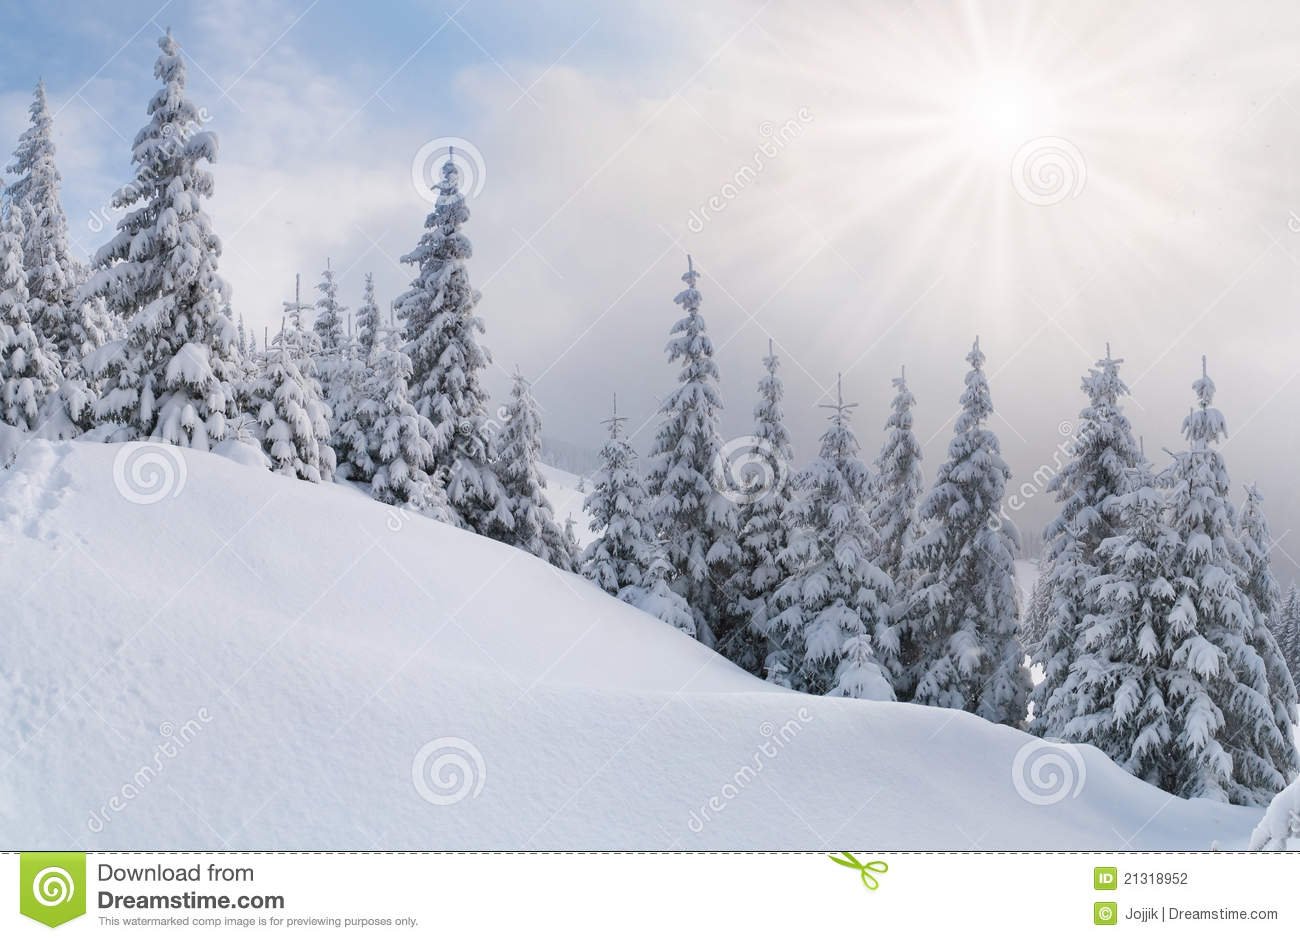 Snowstorm Stock Photography   Image  21318952